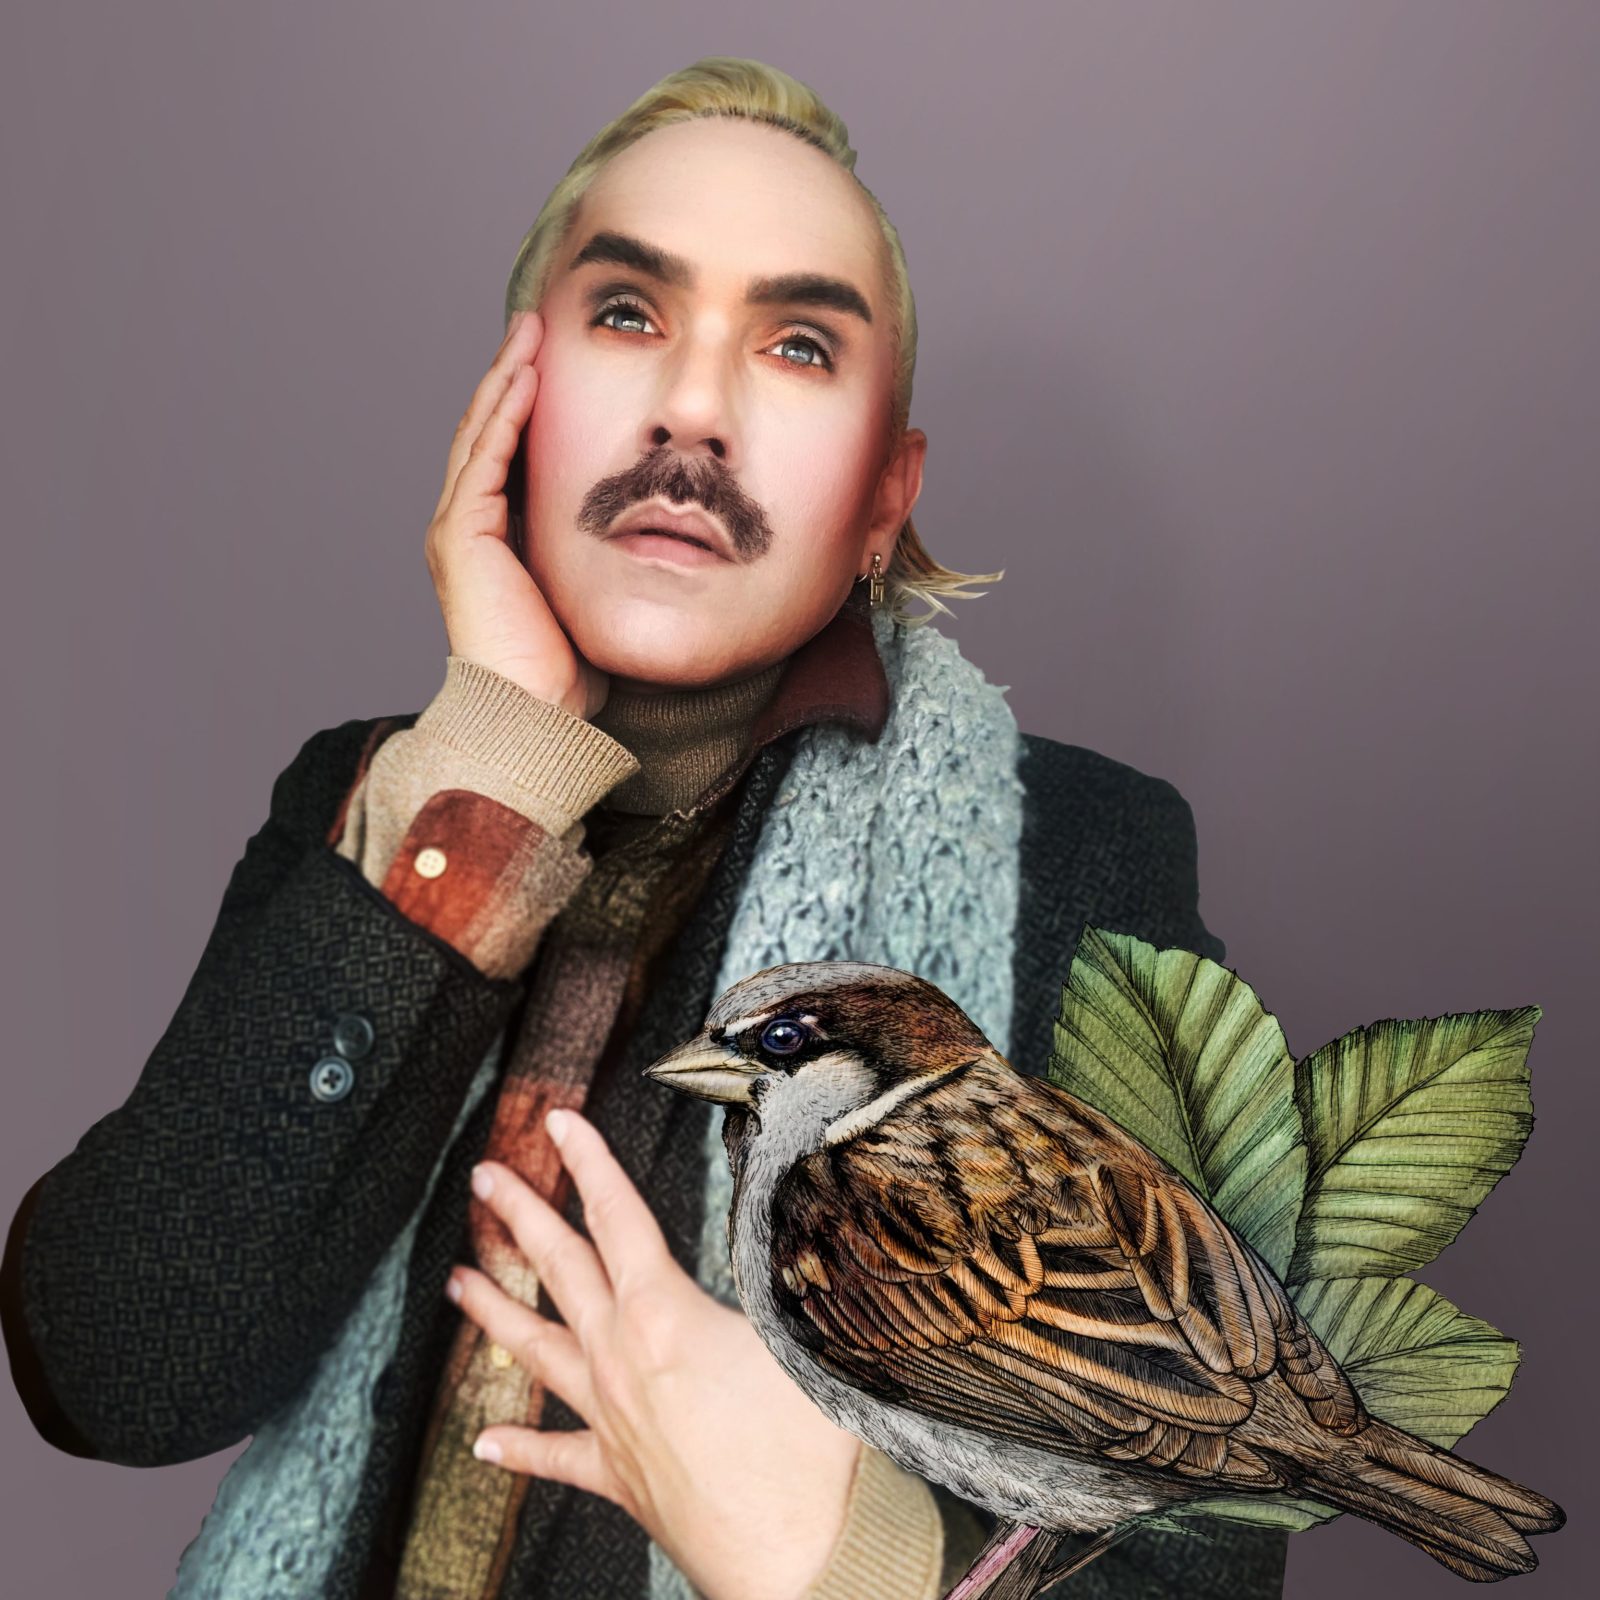 Paul Harfleet dressed up as a Sparrow, he has blonde slicked back hair tucked behind his ears, light smokey eye shadow, and is wearing a tweed jacket and light blue knitted scarf. In front of him is a detailed illustration of the bird.